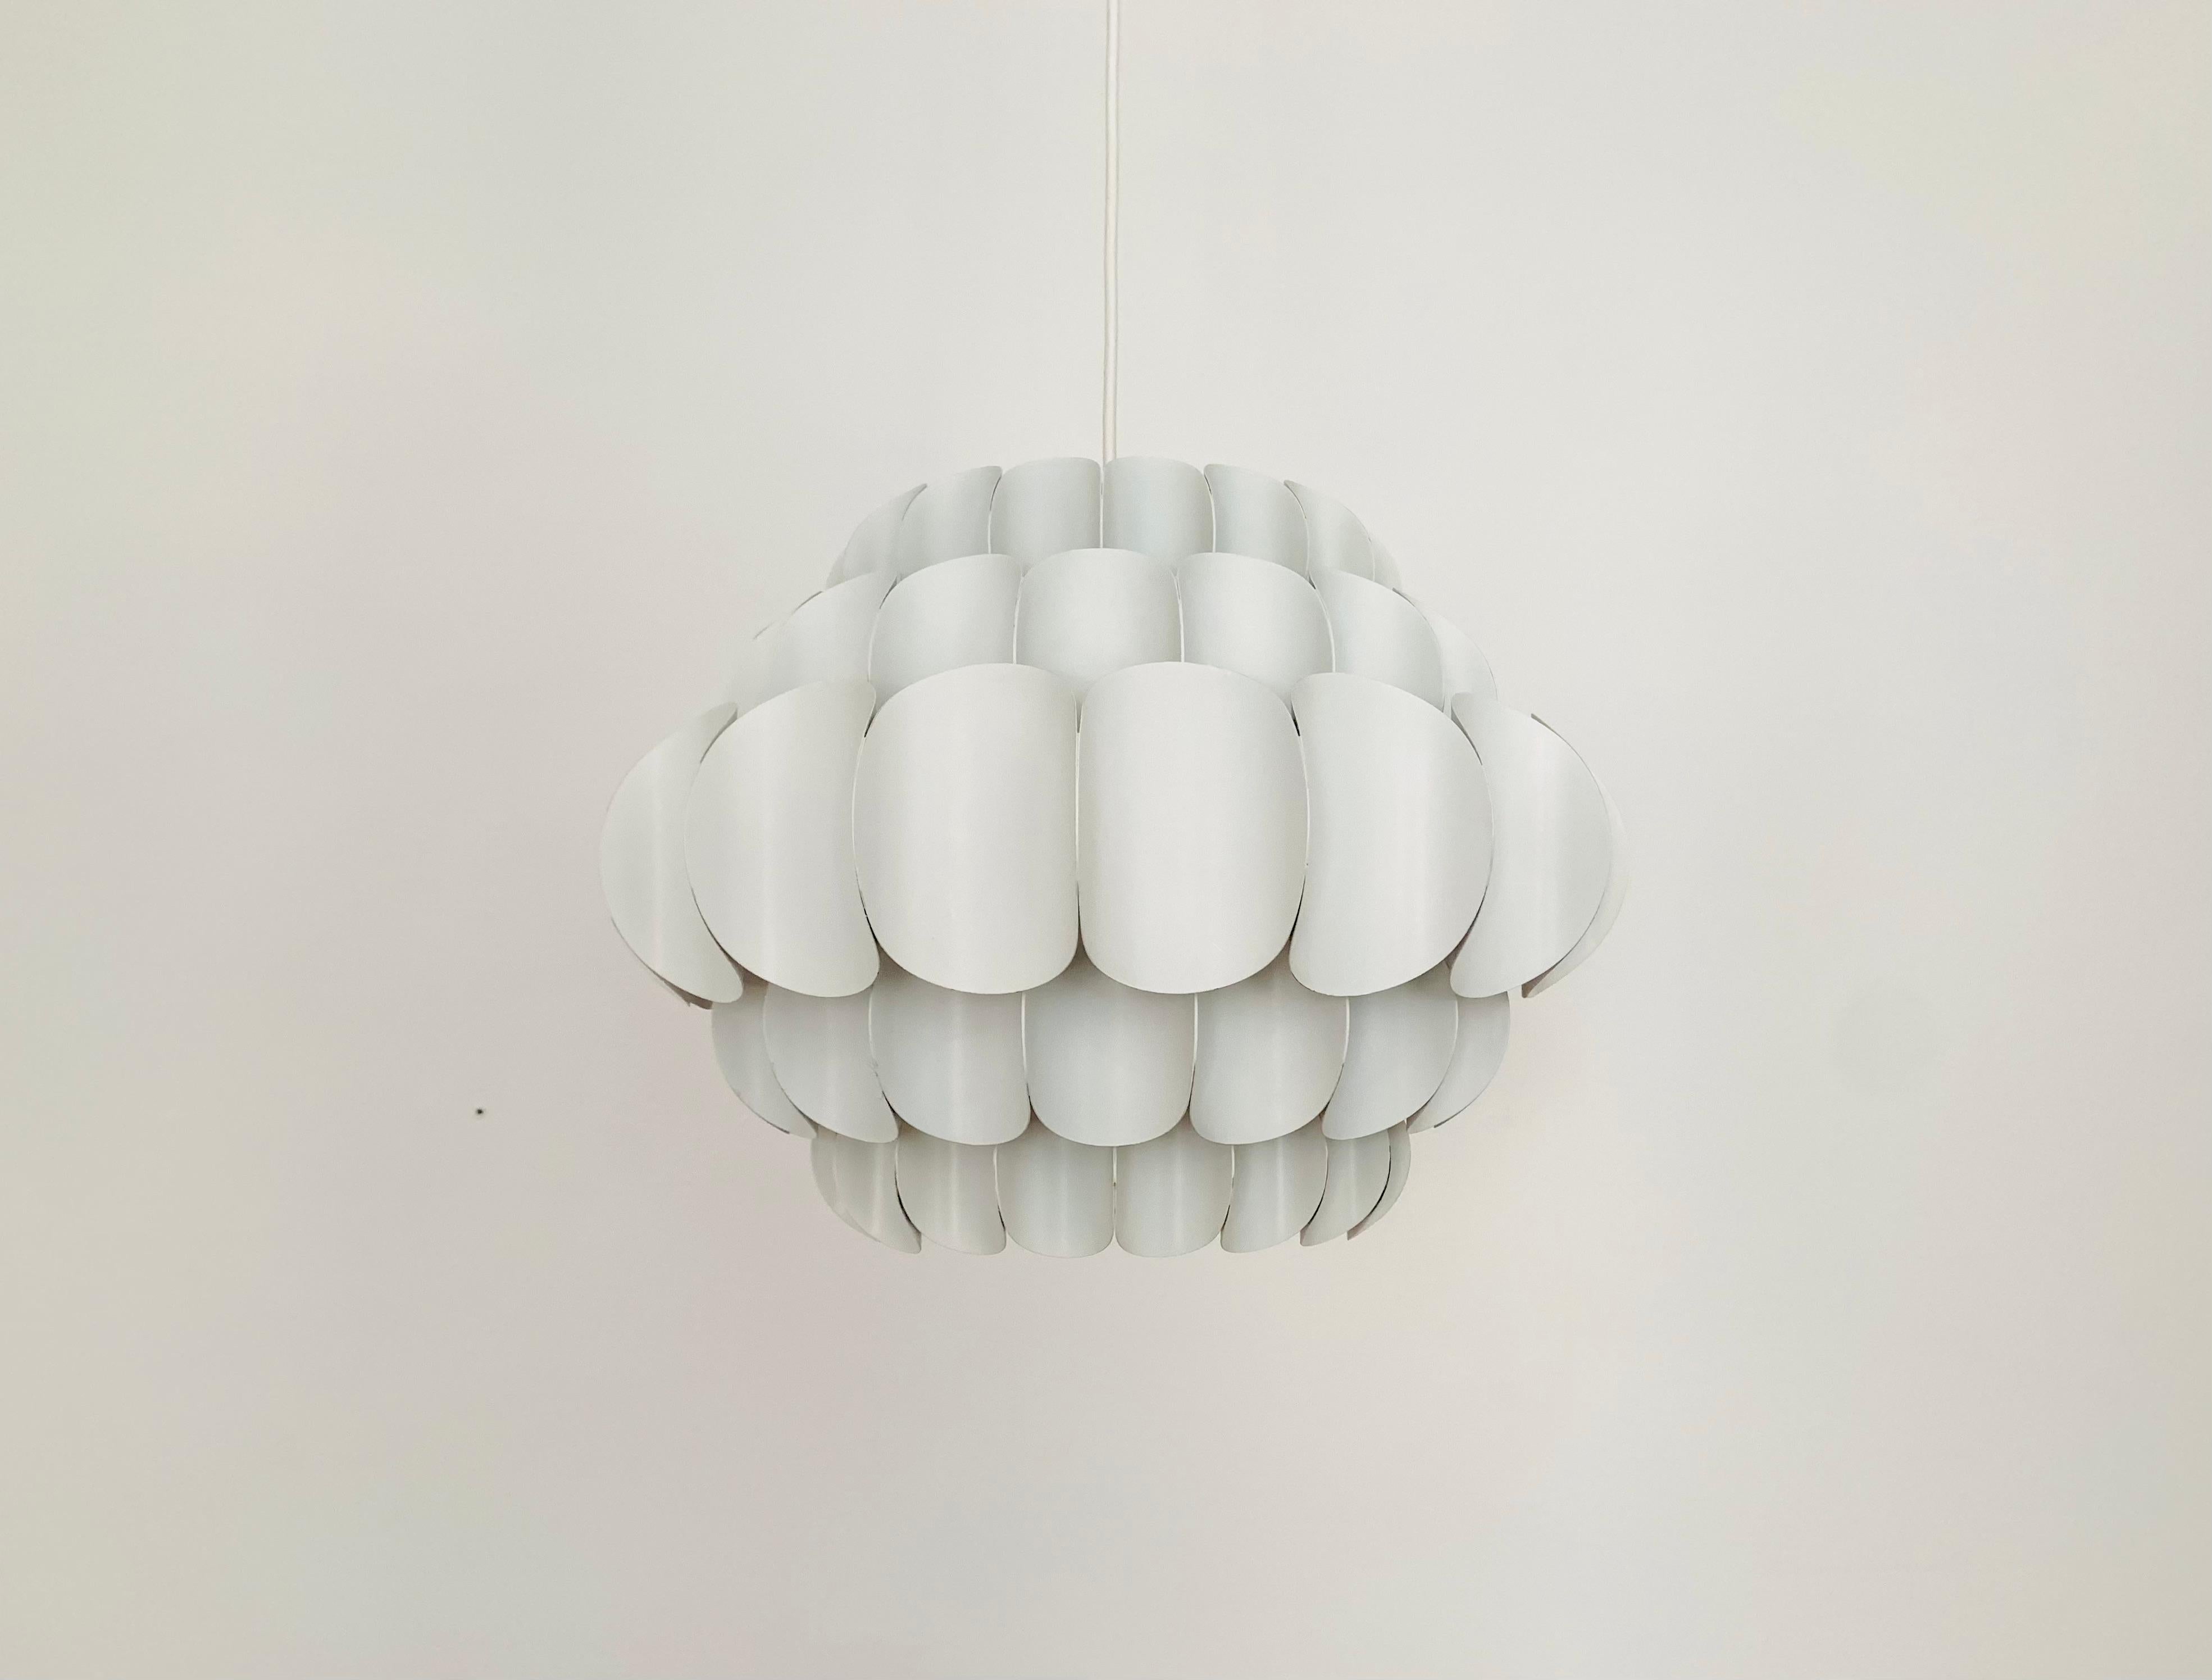 Wonderful white metal pendant lamp by Thorsten Orrling from the 1960s.
The unusual design creates a fantastic play of light in the room.
Large version with 5 rows.

Condition:

Very good vintage condition with slight signs of age-related